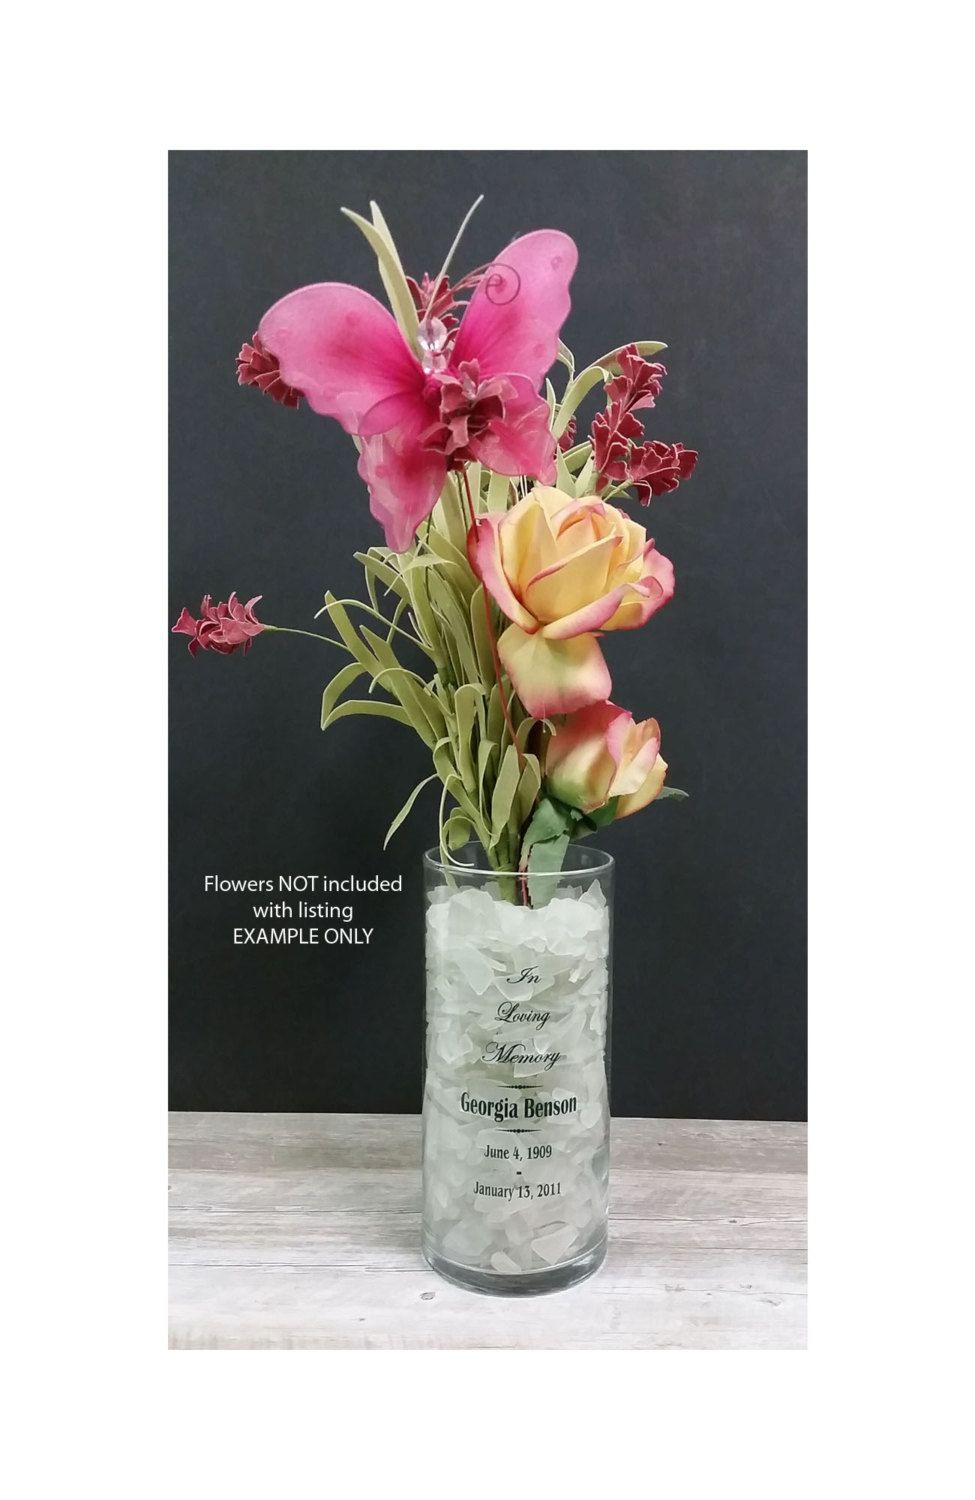 4 ft glass vase of memorial vase clear glass flower vase frosted white sea glass throughout memorial vase clear glass flower vase frosted white sea glass filler engraved